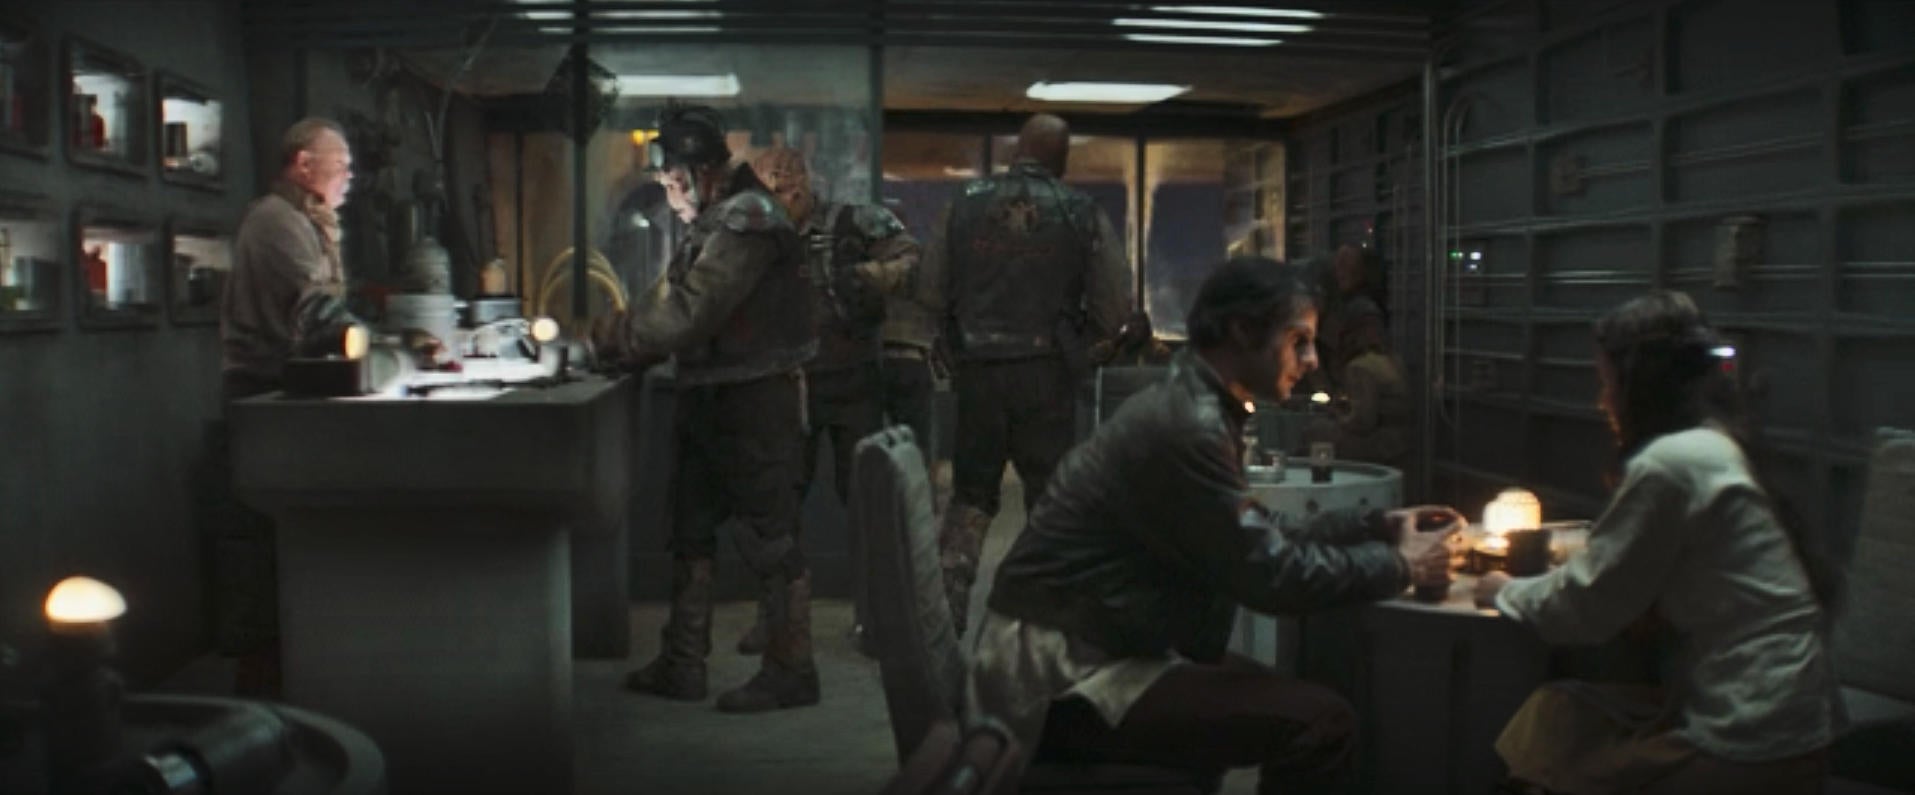 the-book-of-boba-fett-episode-2-tosche-station-star-wars-new-hope-deleted-scene-characters.jpg